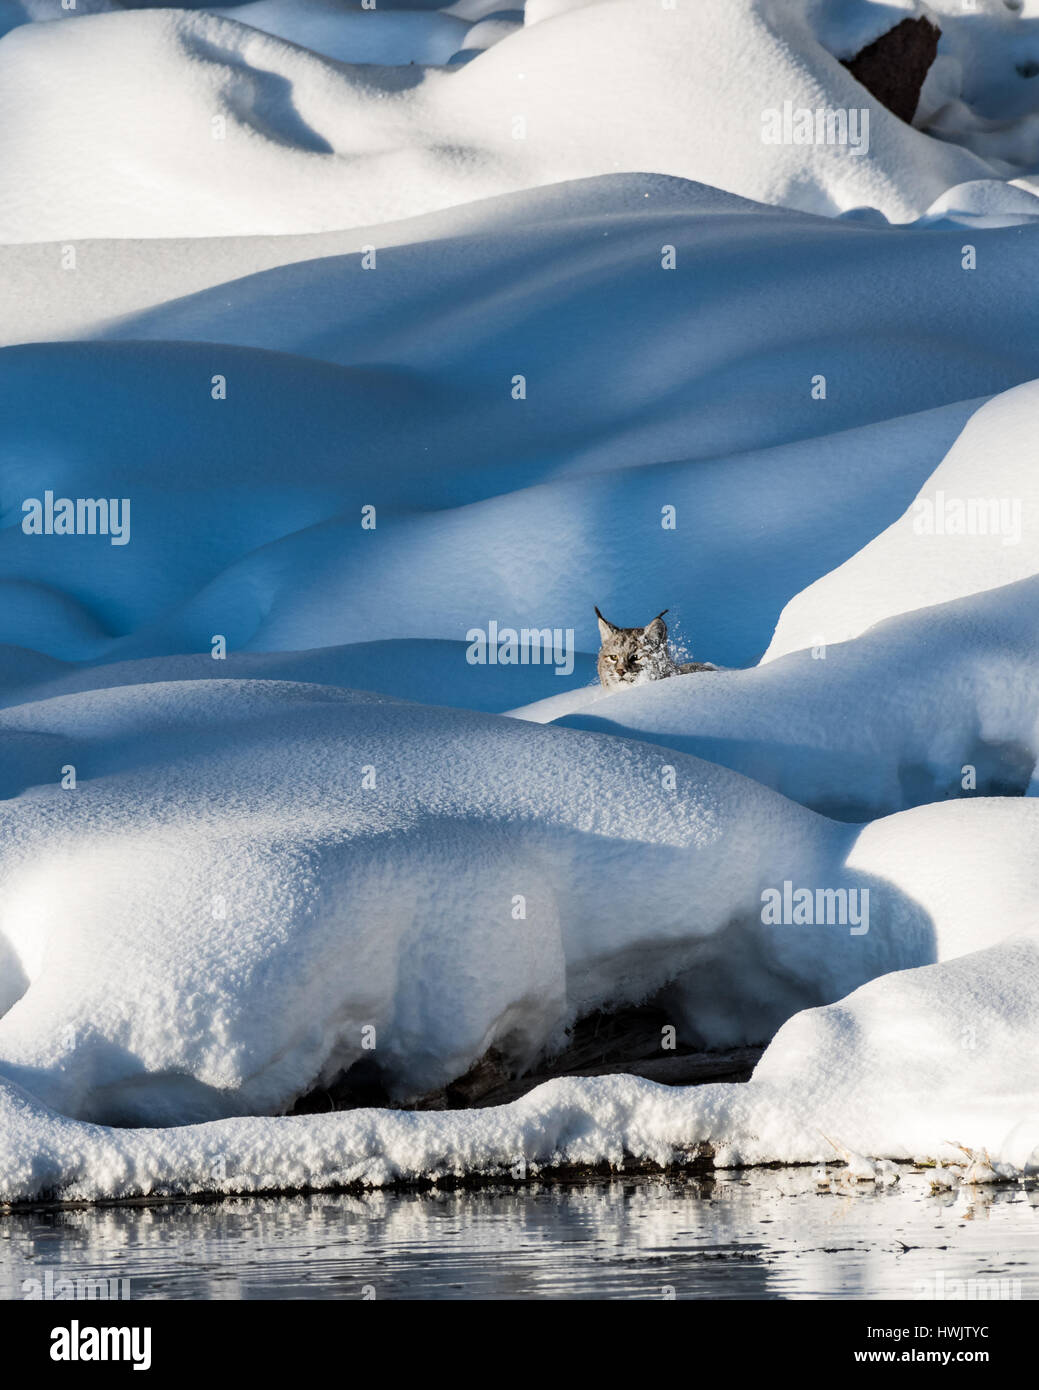 A Bobcat (Lynx rufus) stalking prey near the Madison River in Yellowstone National Park, Wyoming, USA. Stock Photo